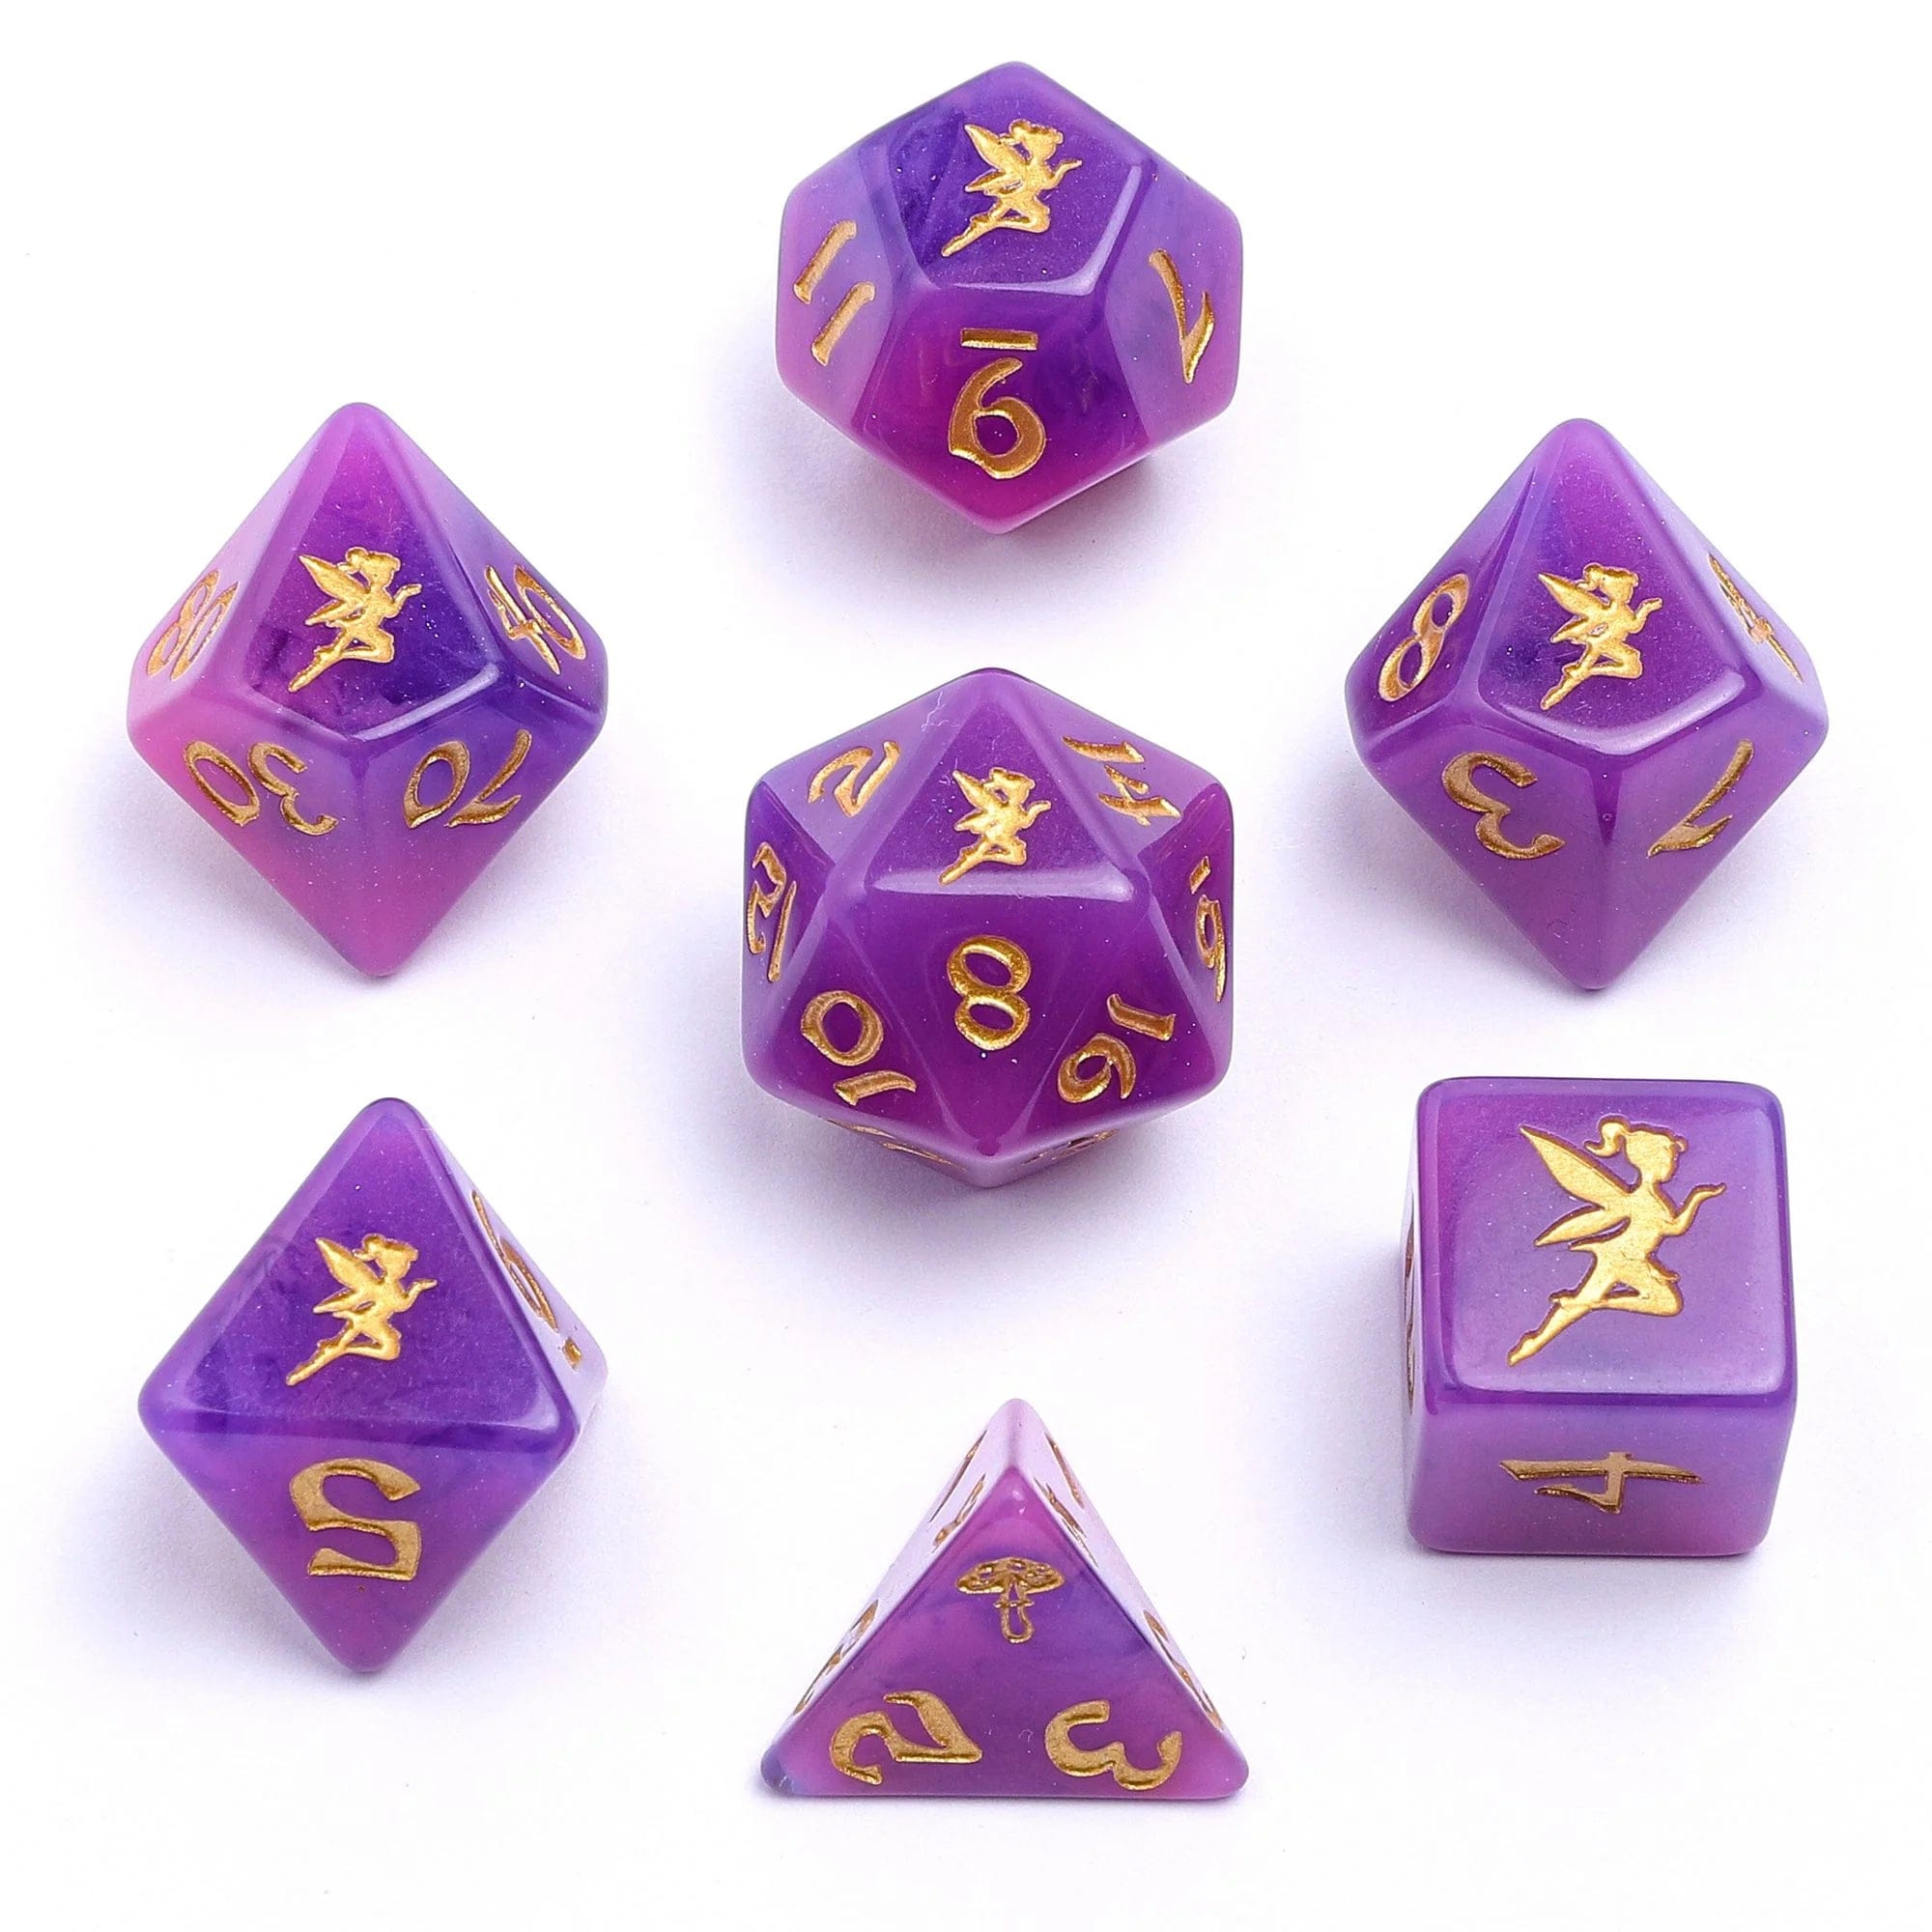 Wyrmforged Rollers - Rounded Resin Polyhedral Dice - Pixie Dust Gold - Saltire Games